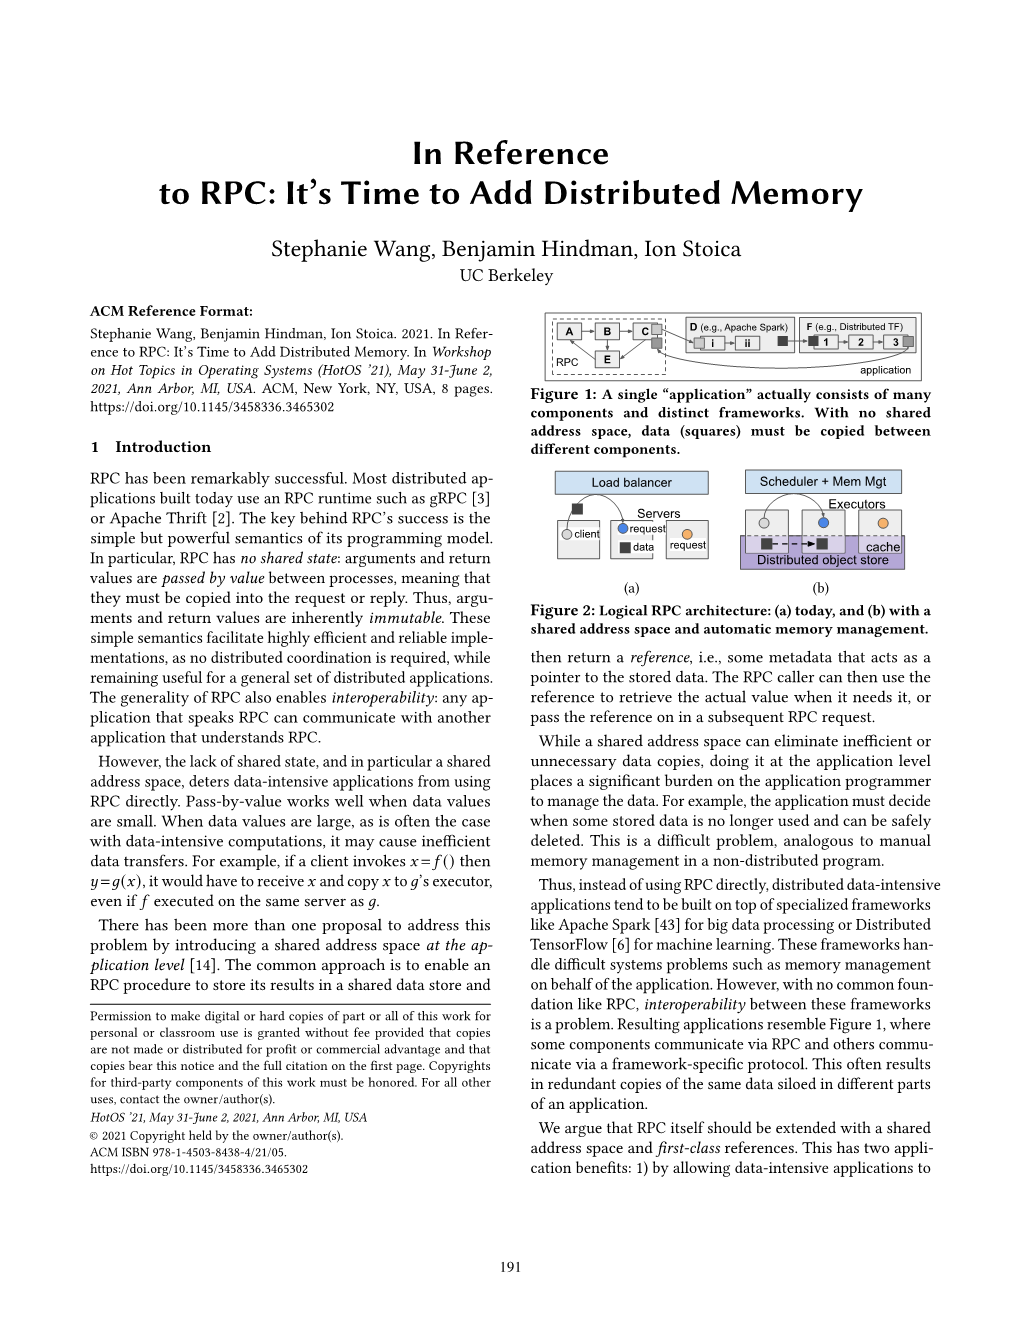 In Reference to RPC: It's Time to Add Distributed Memory